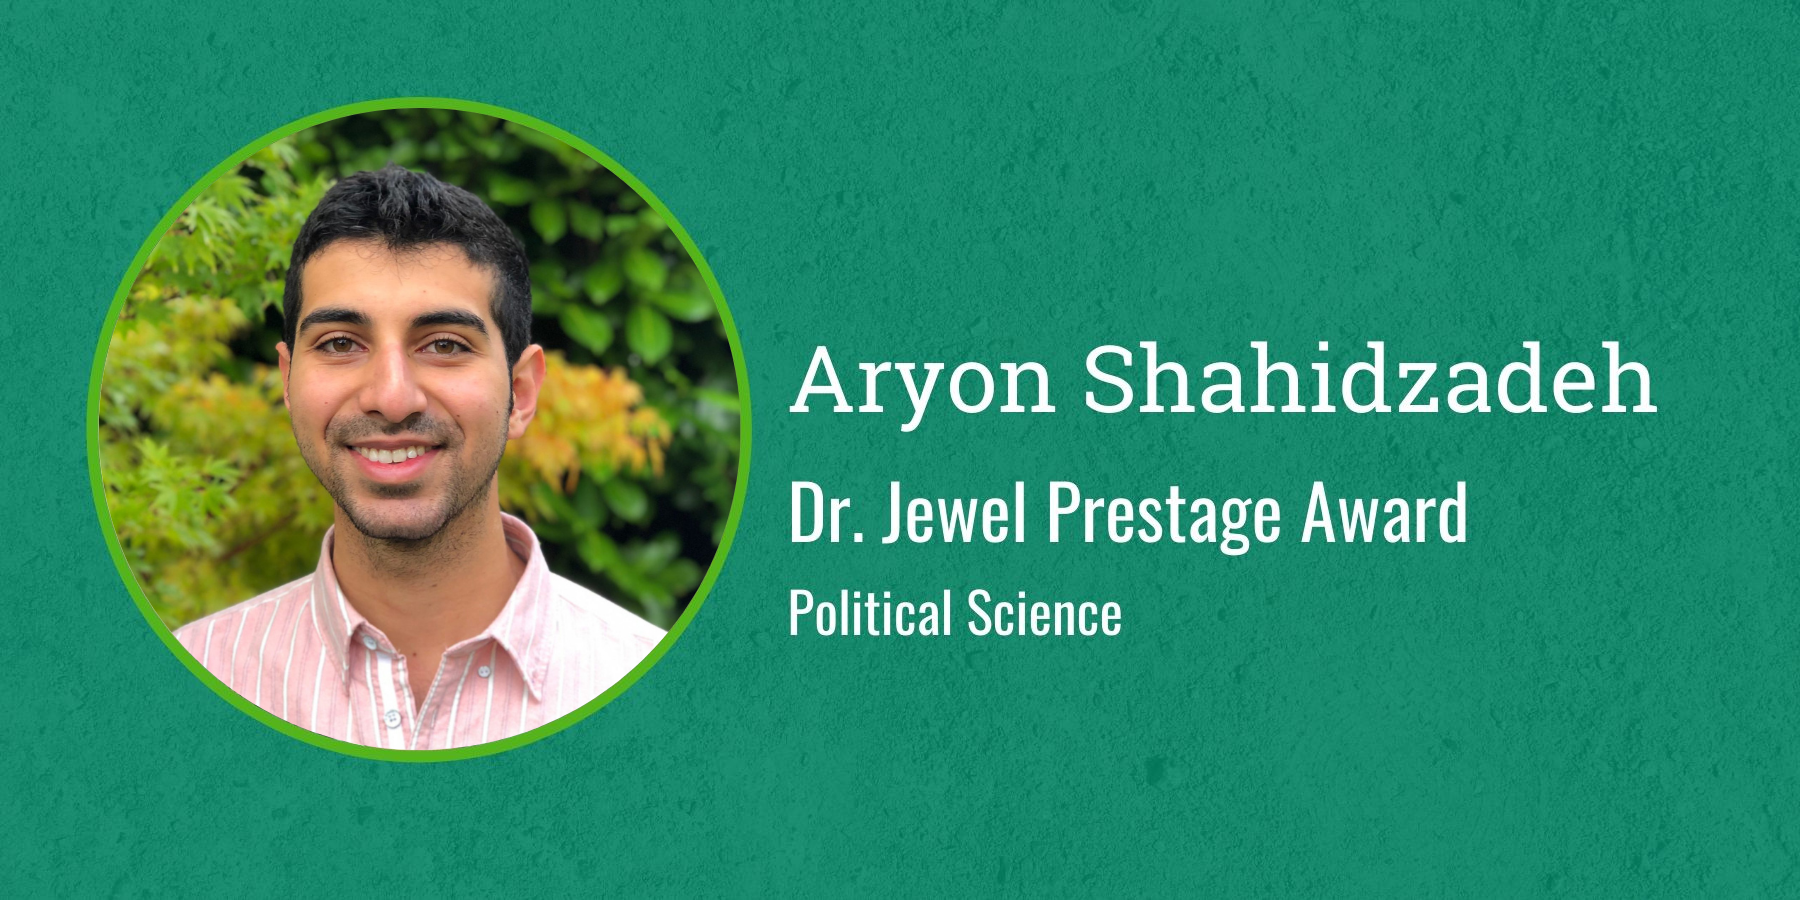 Photo of Aryon Shahidzadeh and text Dr. Jewel Prestage Award, Political Science